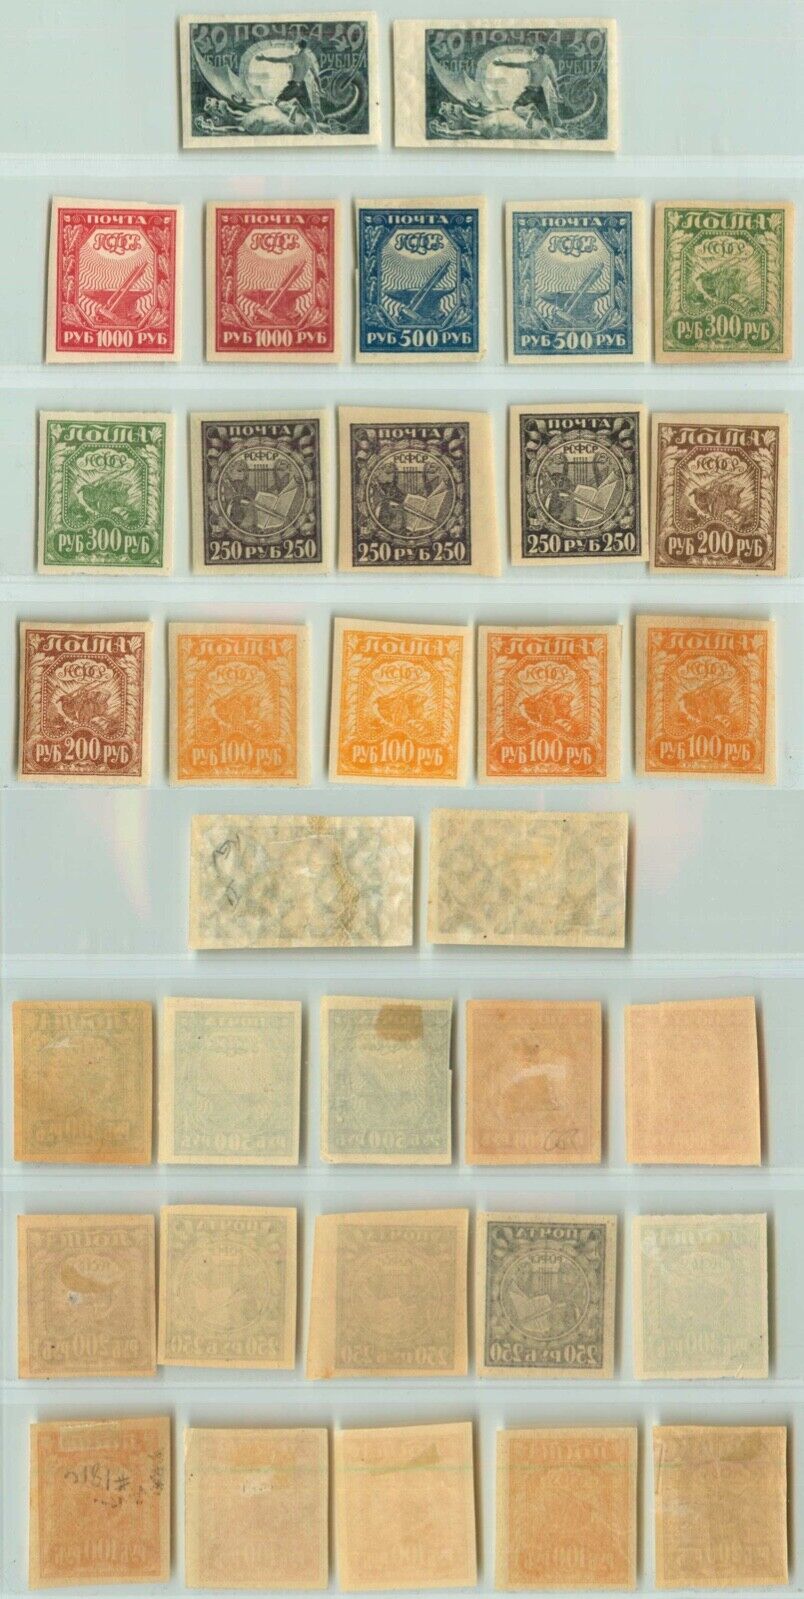 Russia RSFSR 1921  SC 181-186, 187 mint different shades and paper. g3961